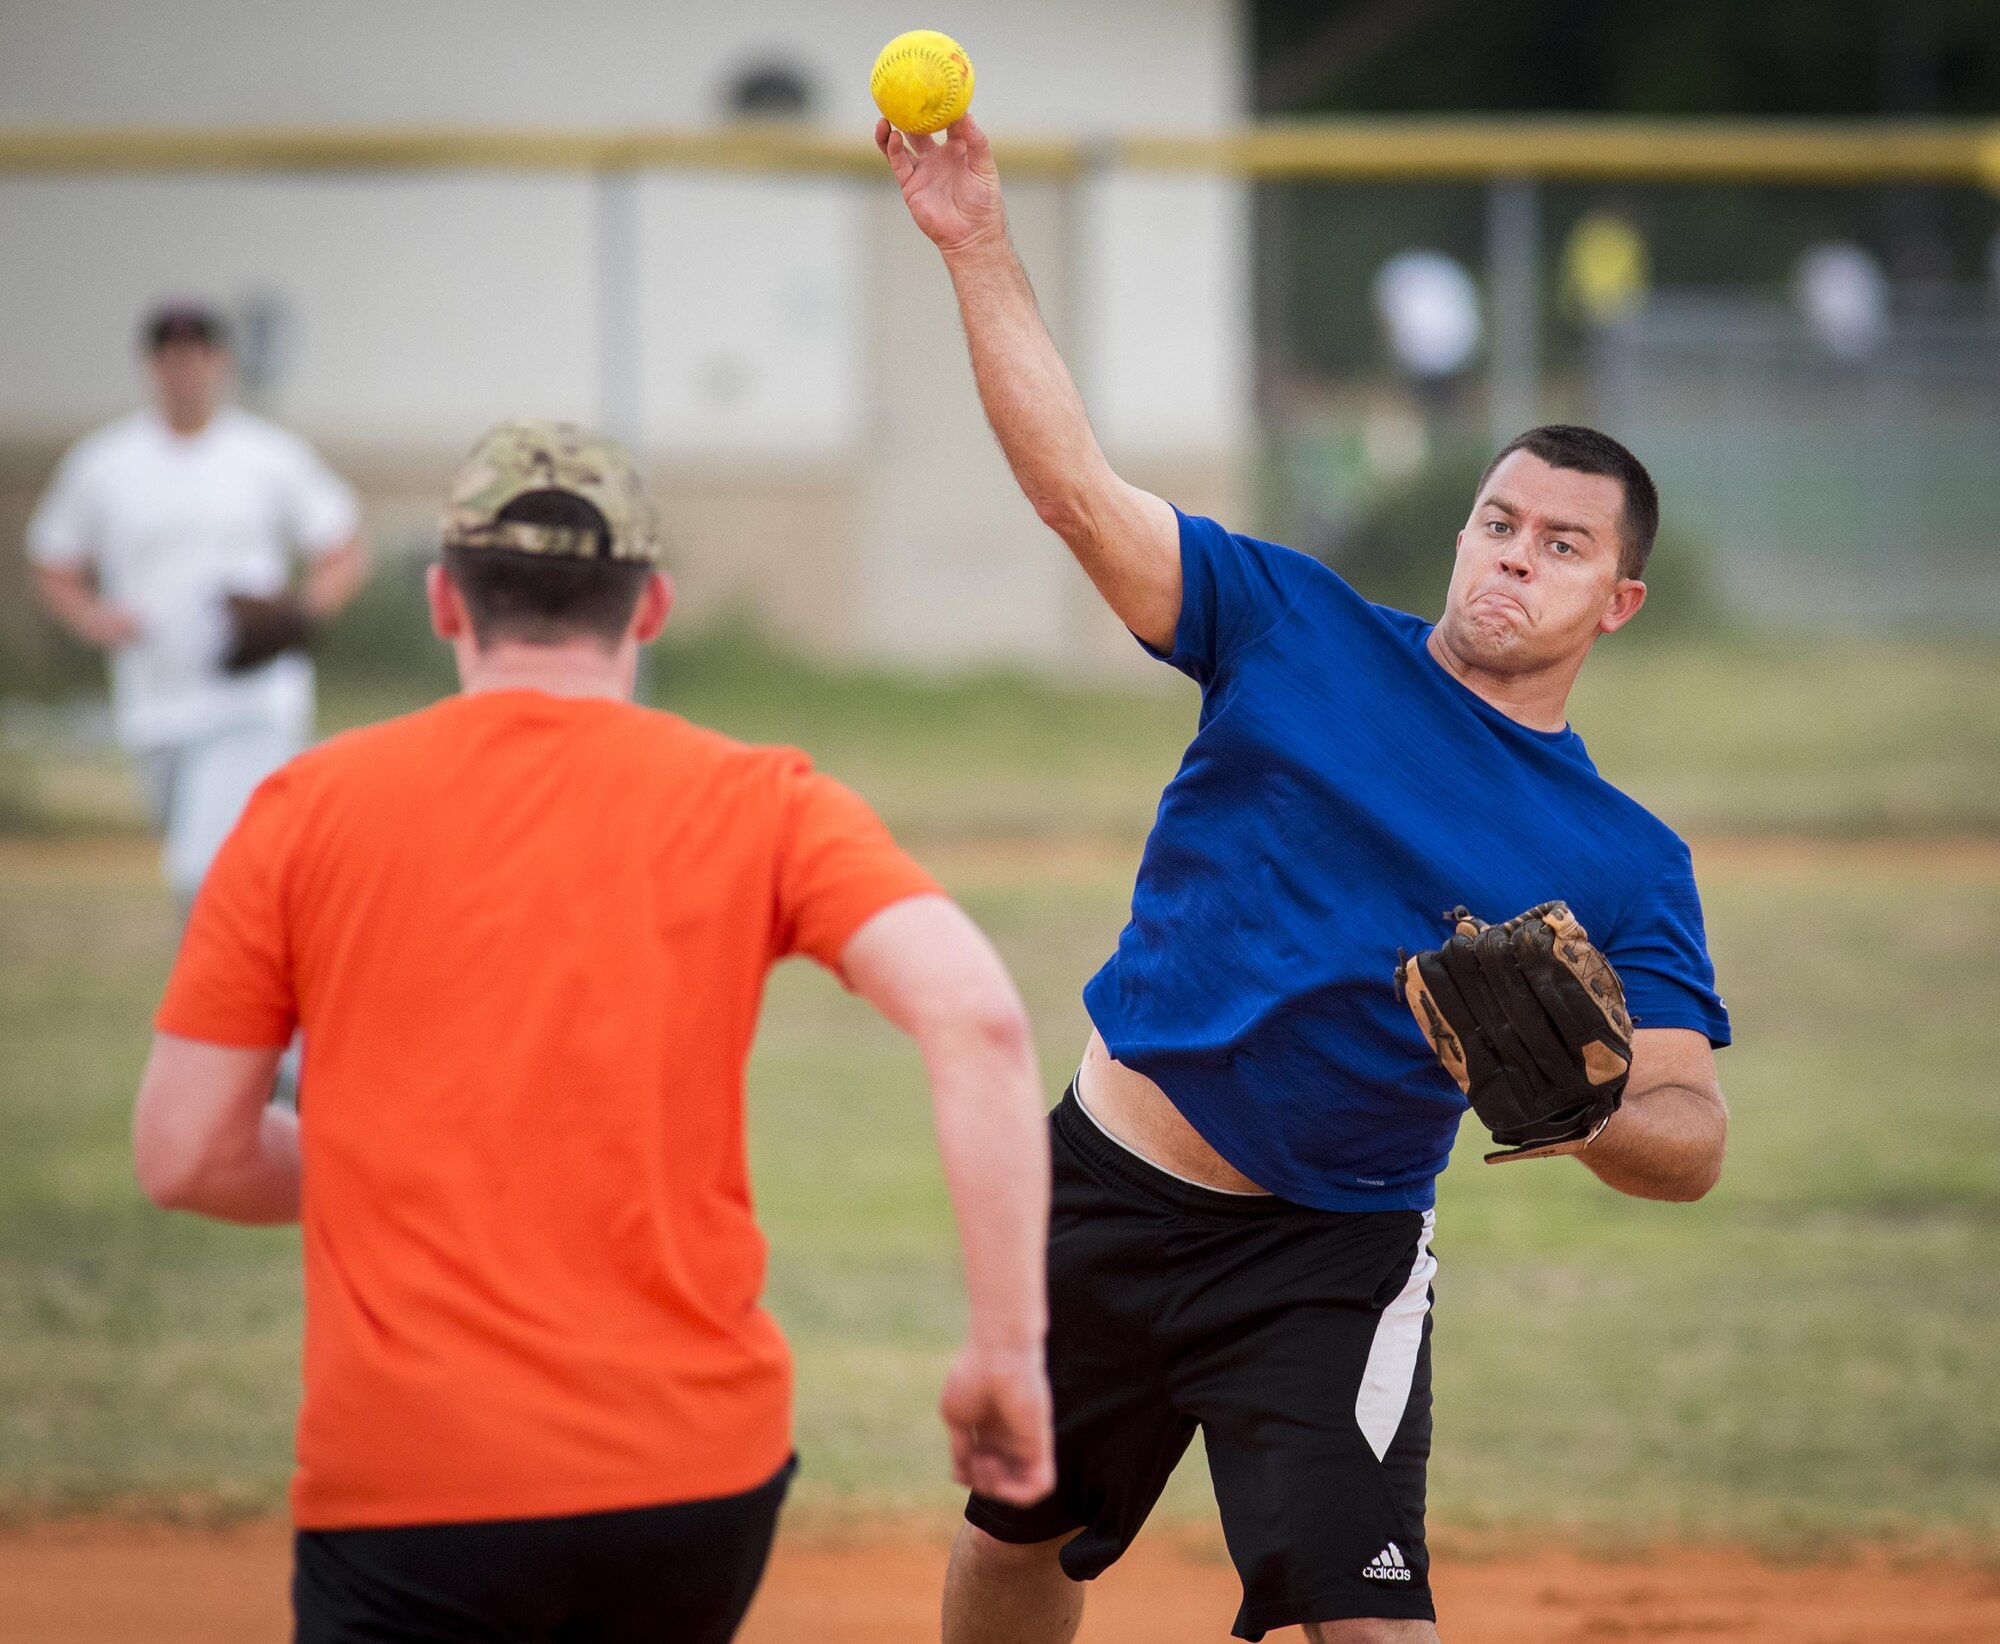 33rd Maintenance Group team second baseman, Jeffrey Beazey, tries for a double-play during their team’s intramural softball game against the 96th Communications Squadron team at Eglin Air Force Base, Fla., May 11.  The CS team won easily over the MXG team during the opening week of the intramural softball season.  (U.S. Air Force photo/Samuel King Jr.)